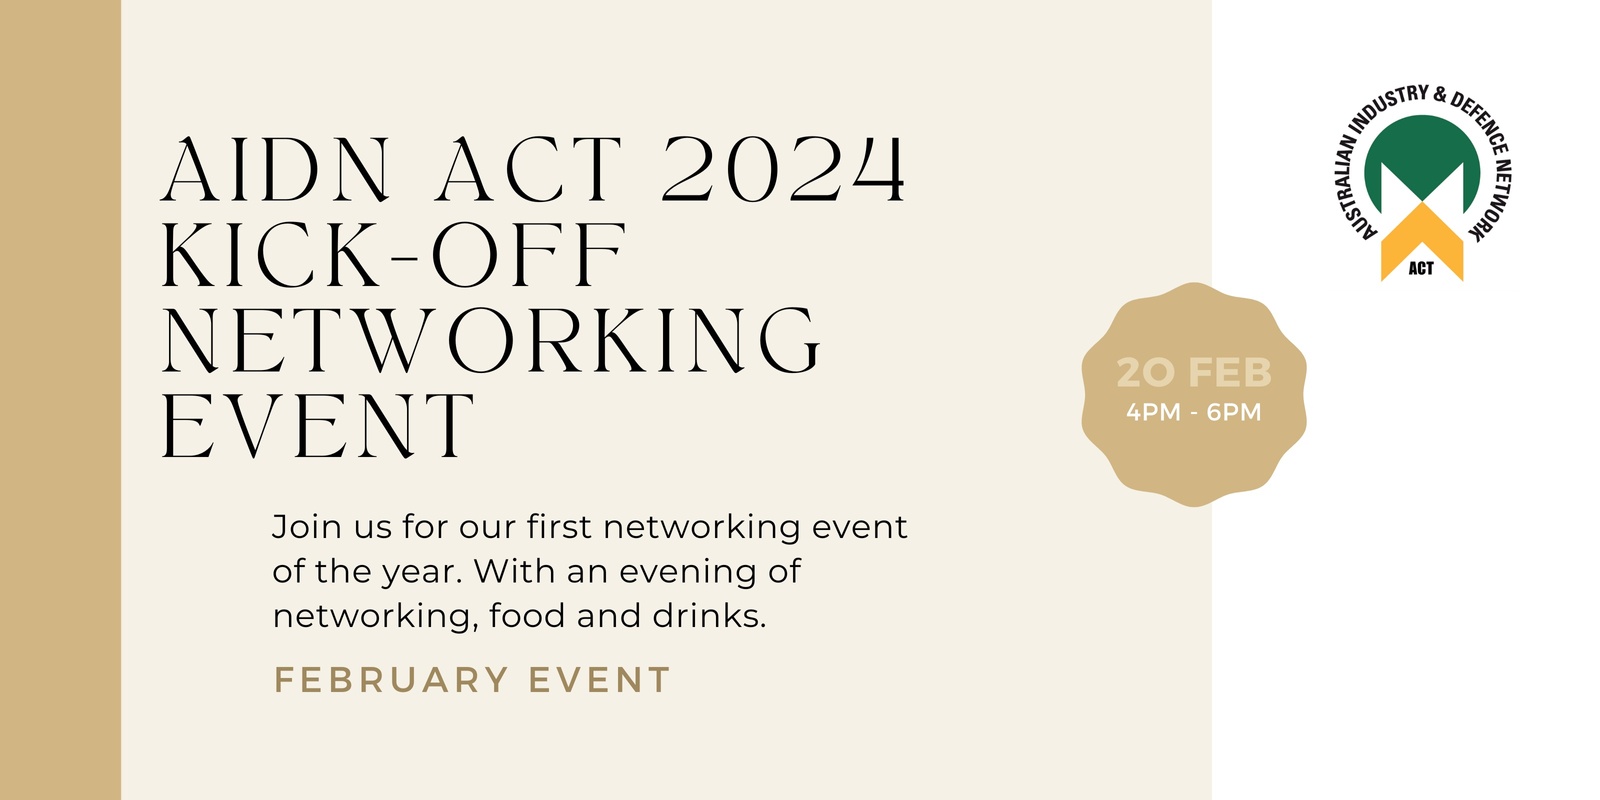 AIDN ACT 2024 KickOff Networking Event Humanitix